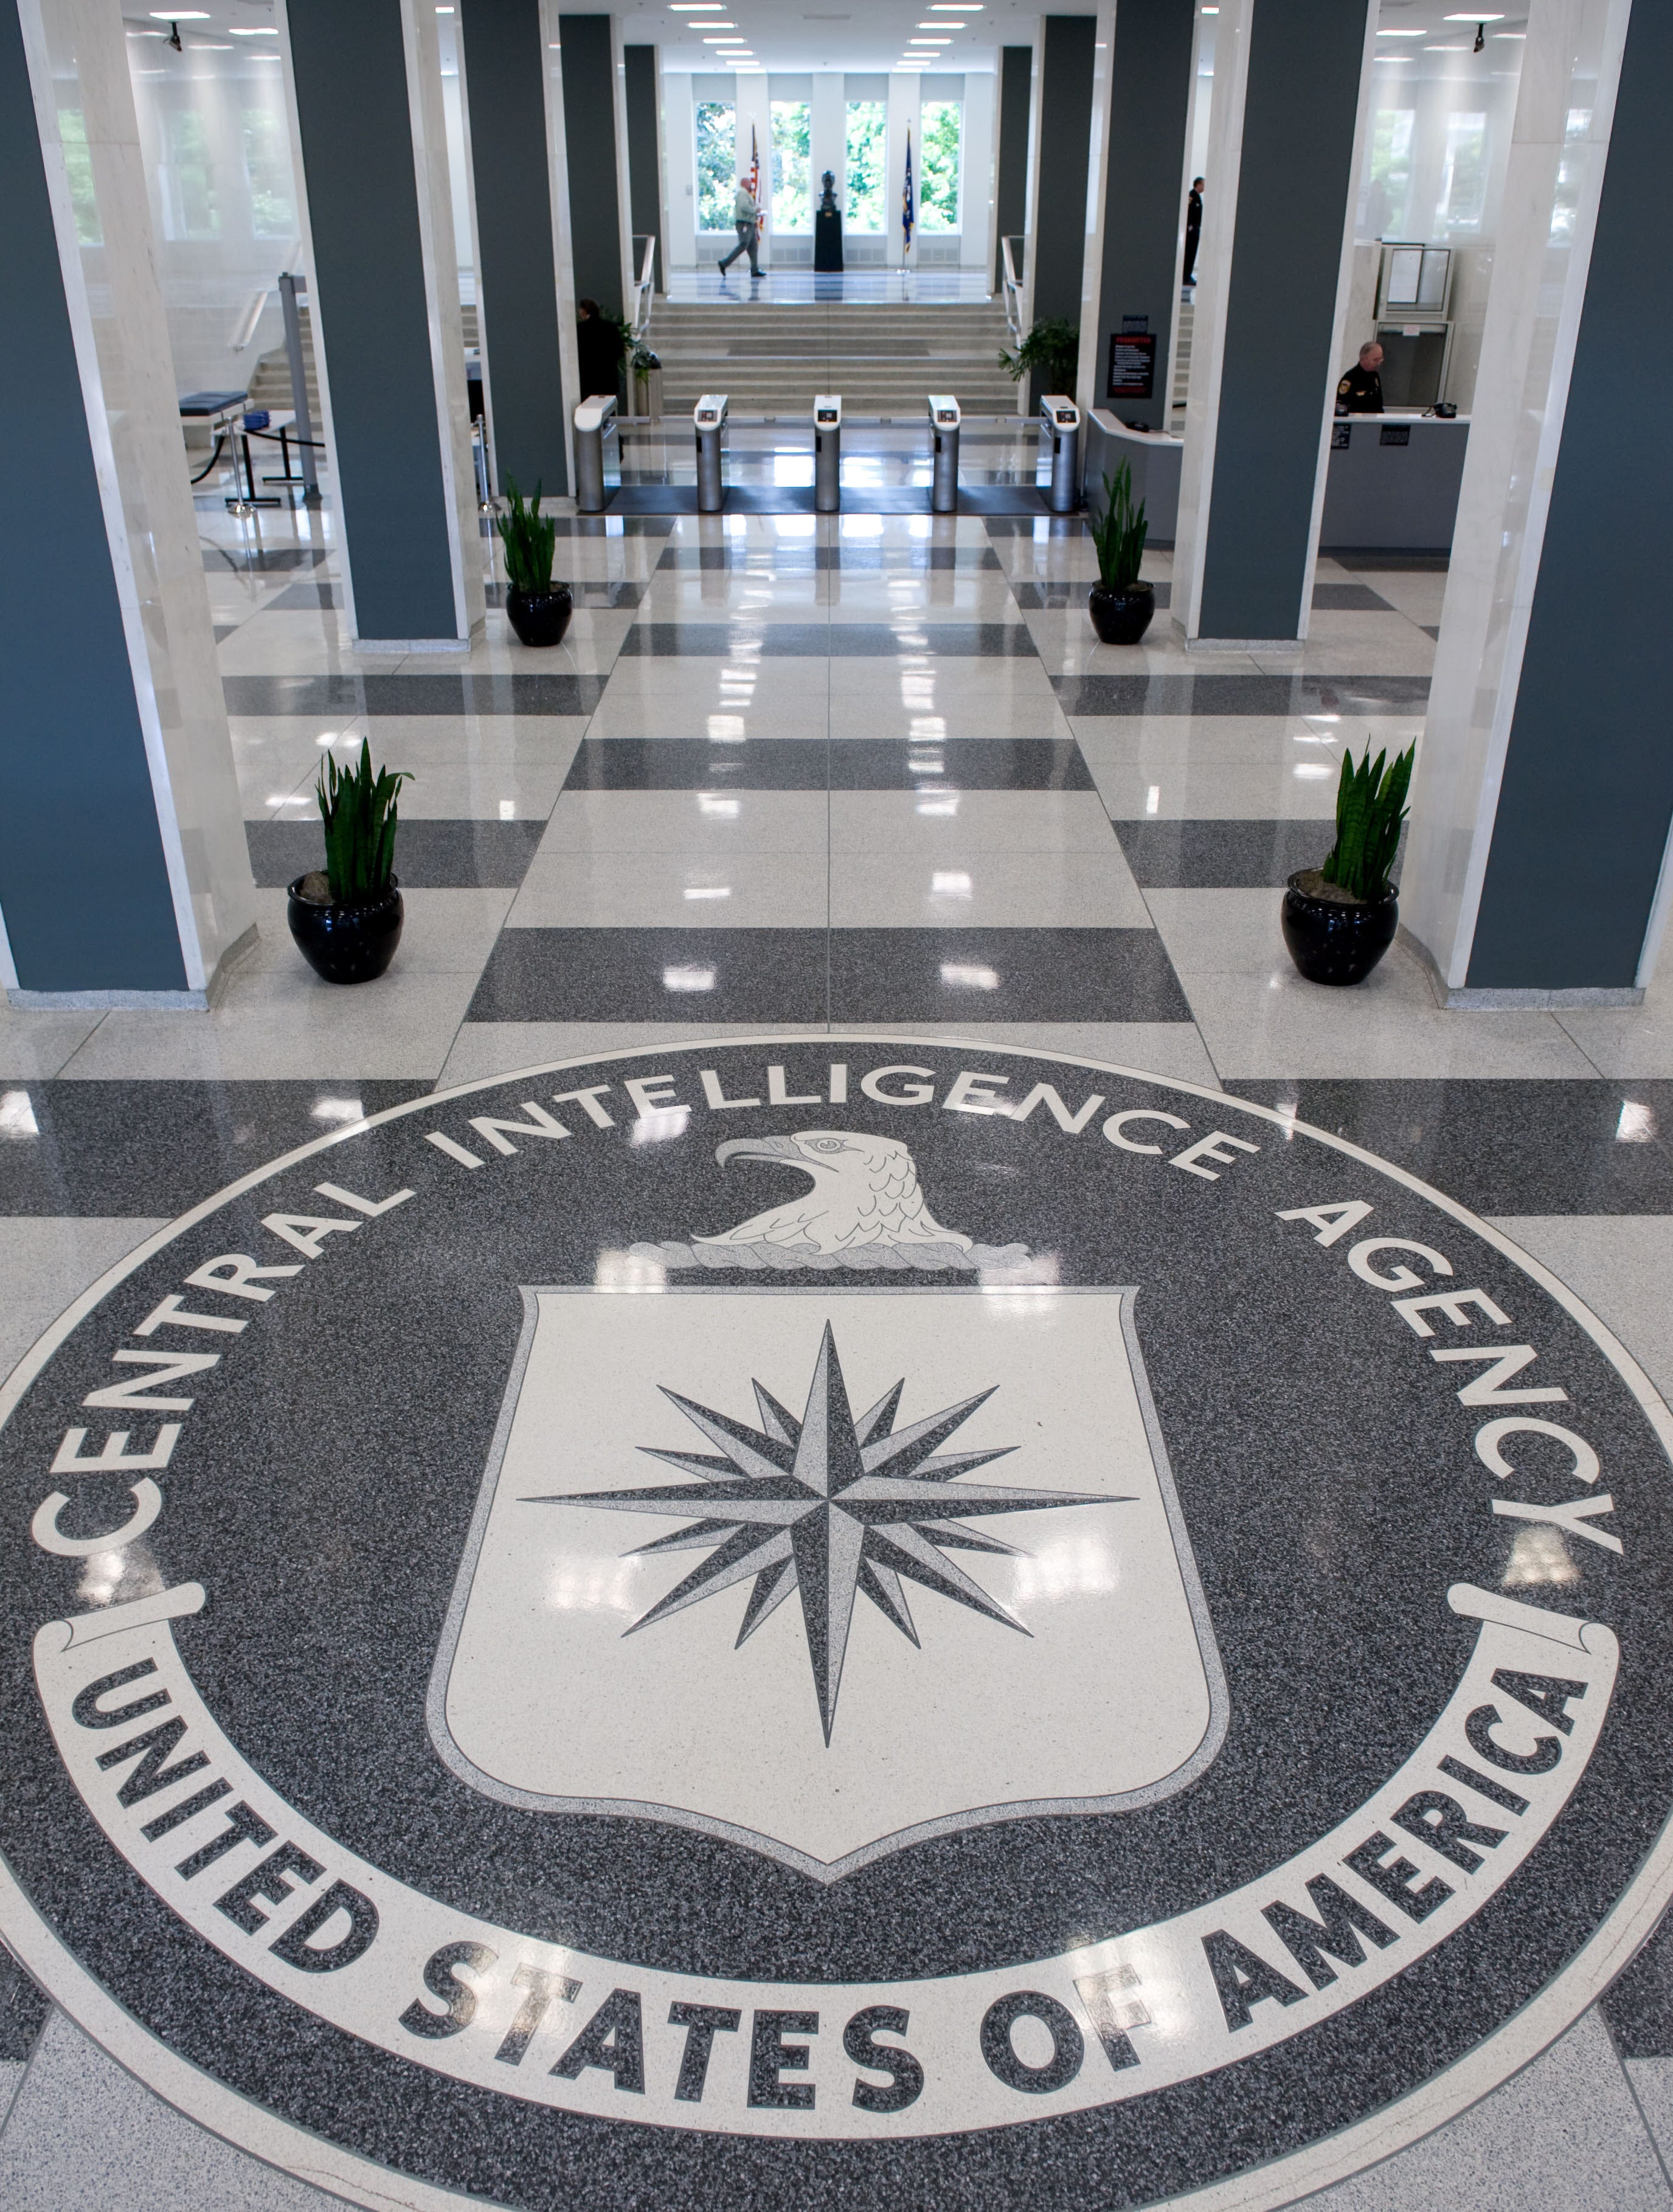 WikiLeaks says it has exposed the CIA's hacking operations. Here's what